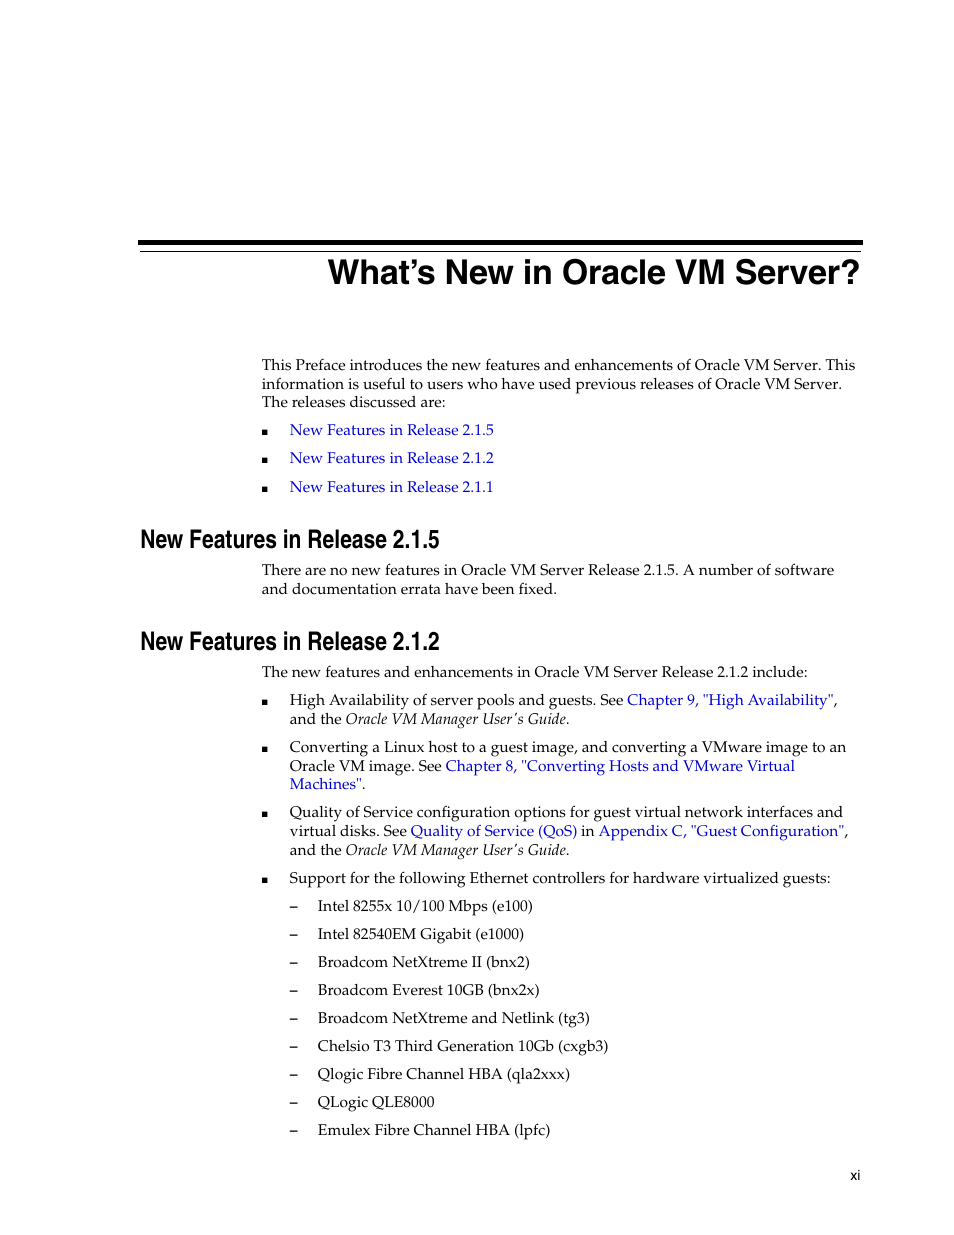 What’s new in oracle vm server, New features in release 2.1.5, New features in release 2.1.2 | Oracle Audio Technologies E10898-02 User Manual | Page 11 / 112